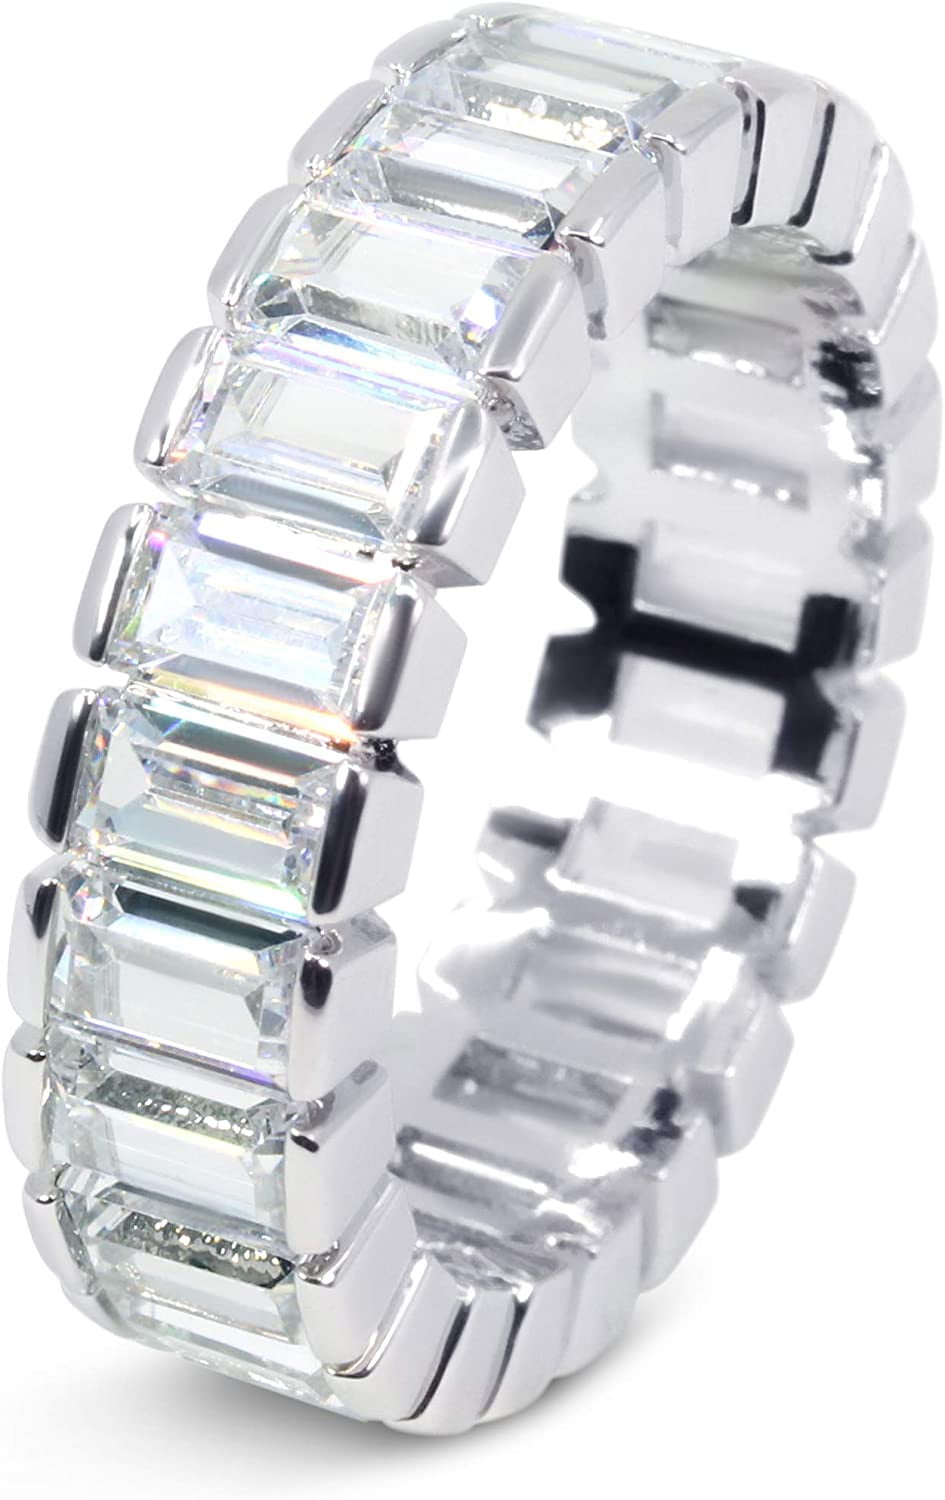 Etenity Bnad,18K White Gold Plated Cubic Zirconia Emerald Cut Eternity Ring Band for Women Men